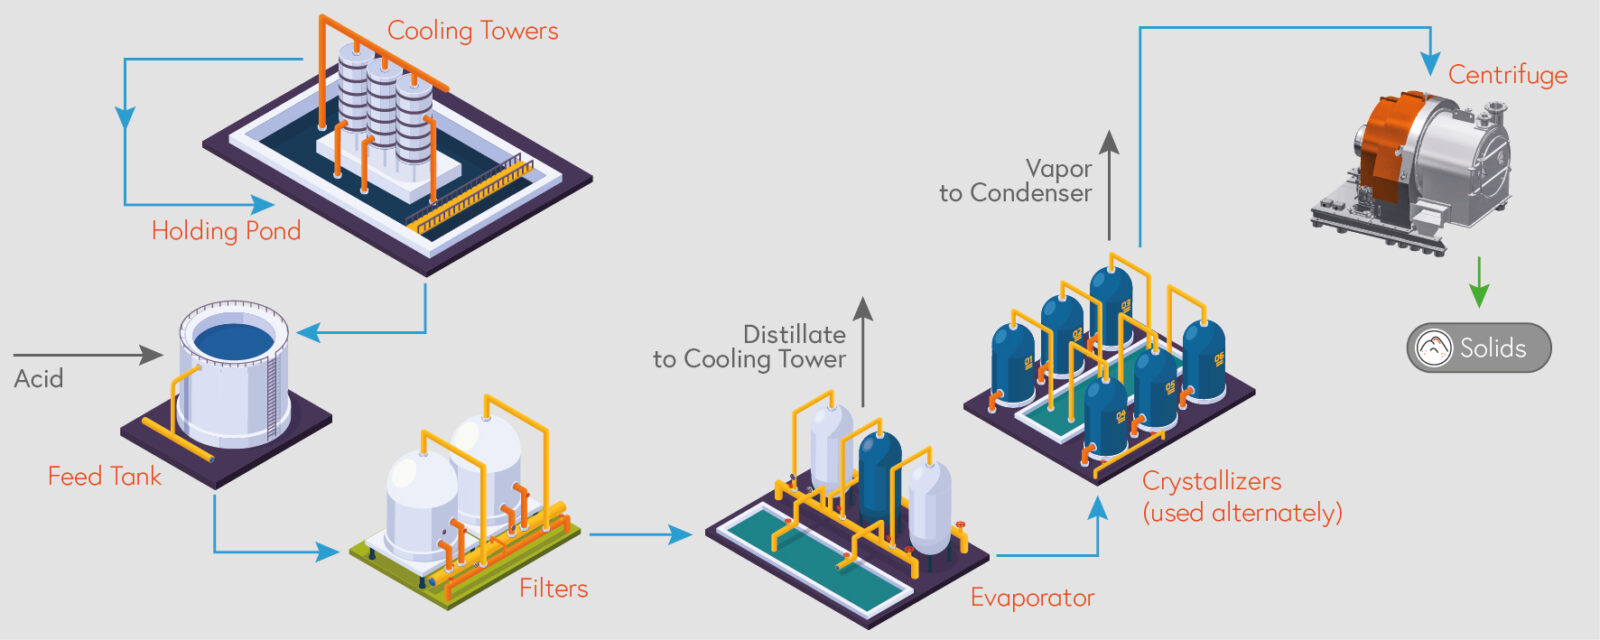 ZLD Process - Holding pond, feed tank, filters, evaporator, crystallizers, centrifuges